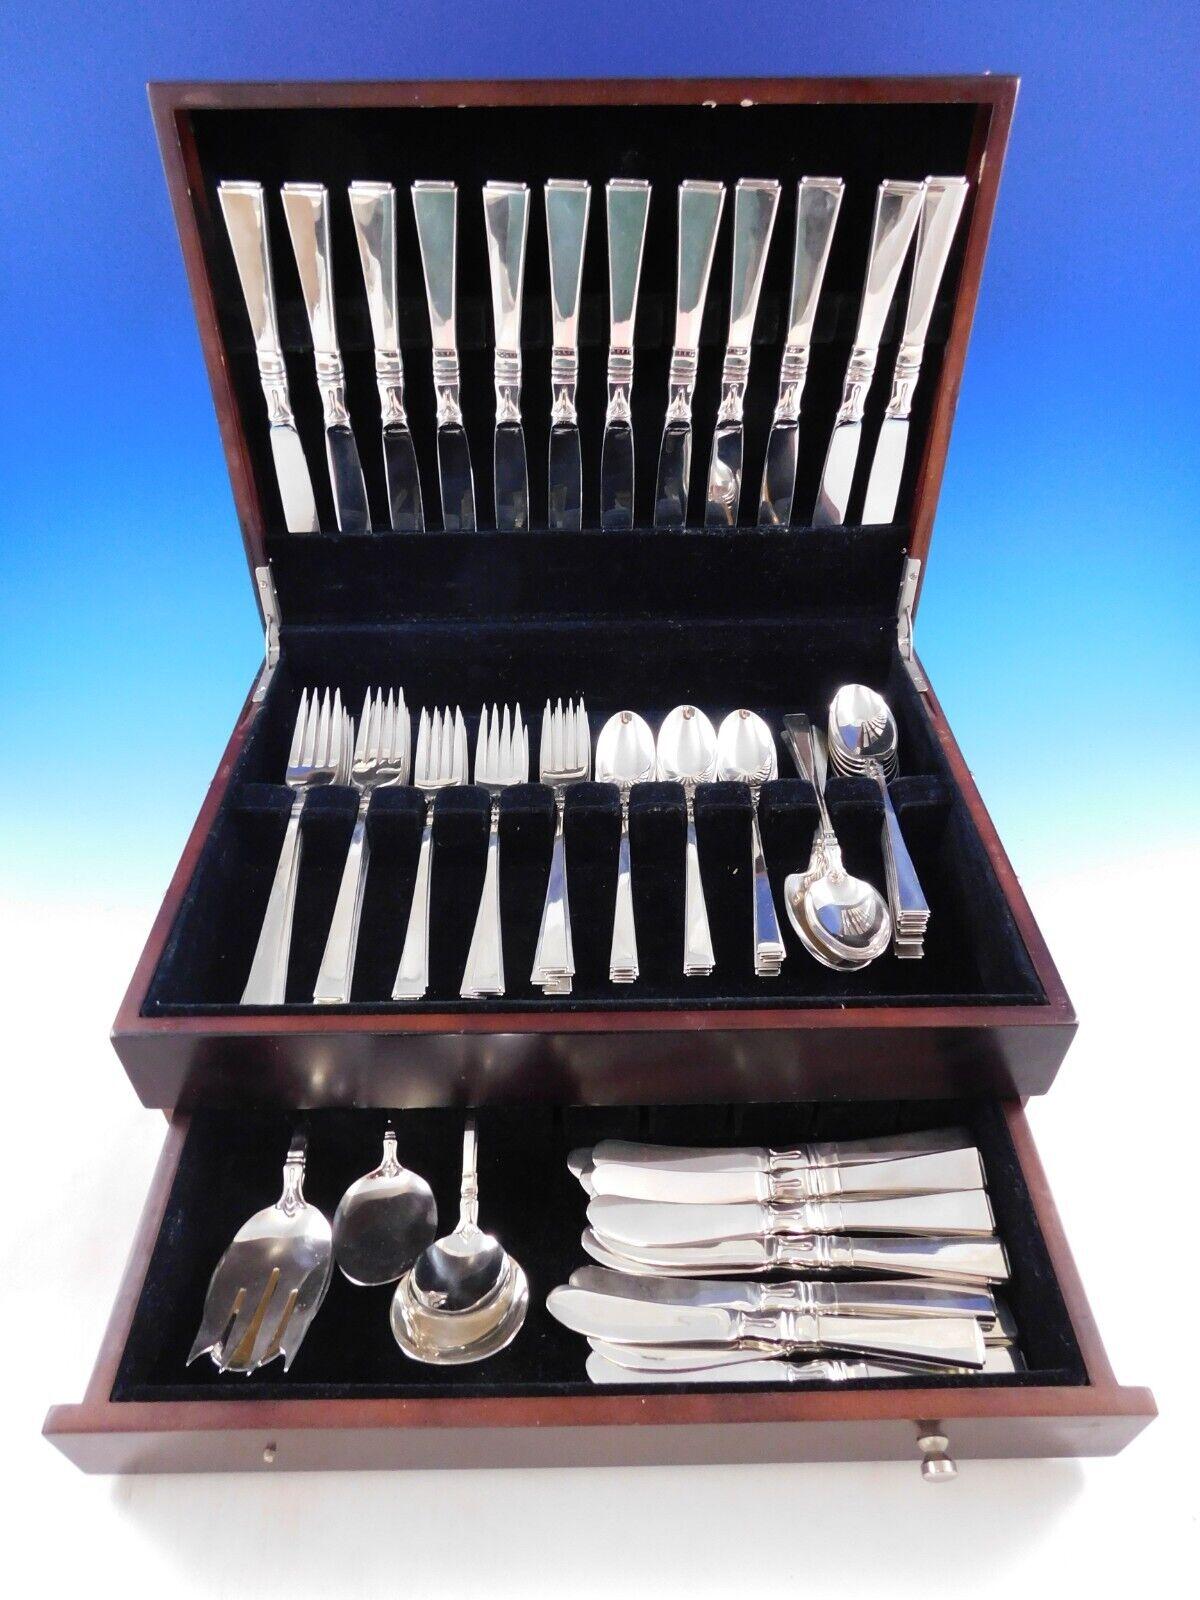 Classic Beauty by Frank Smith sterling silver flatware set - 78 pieces. This set includes:

12 Knives, 9